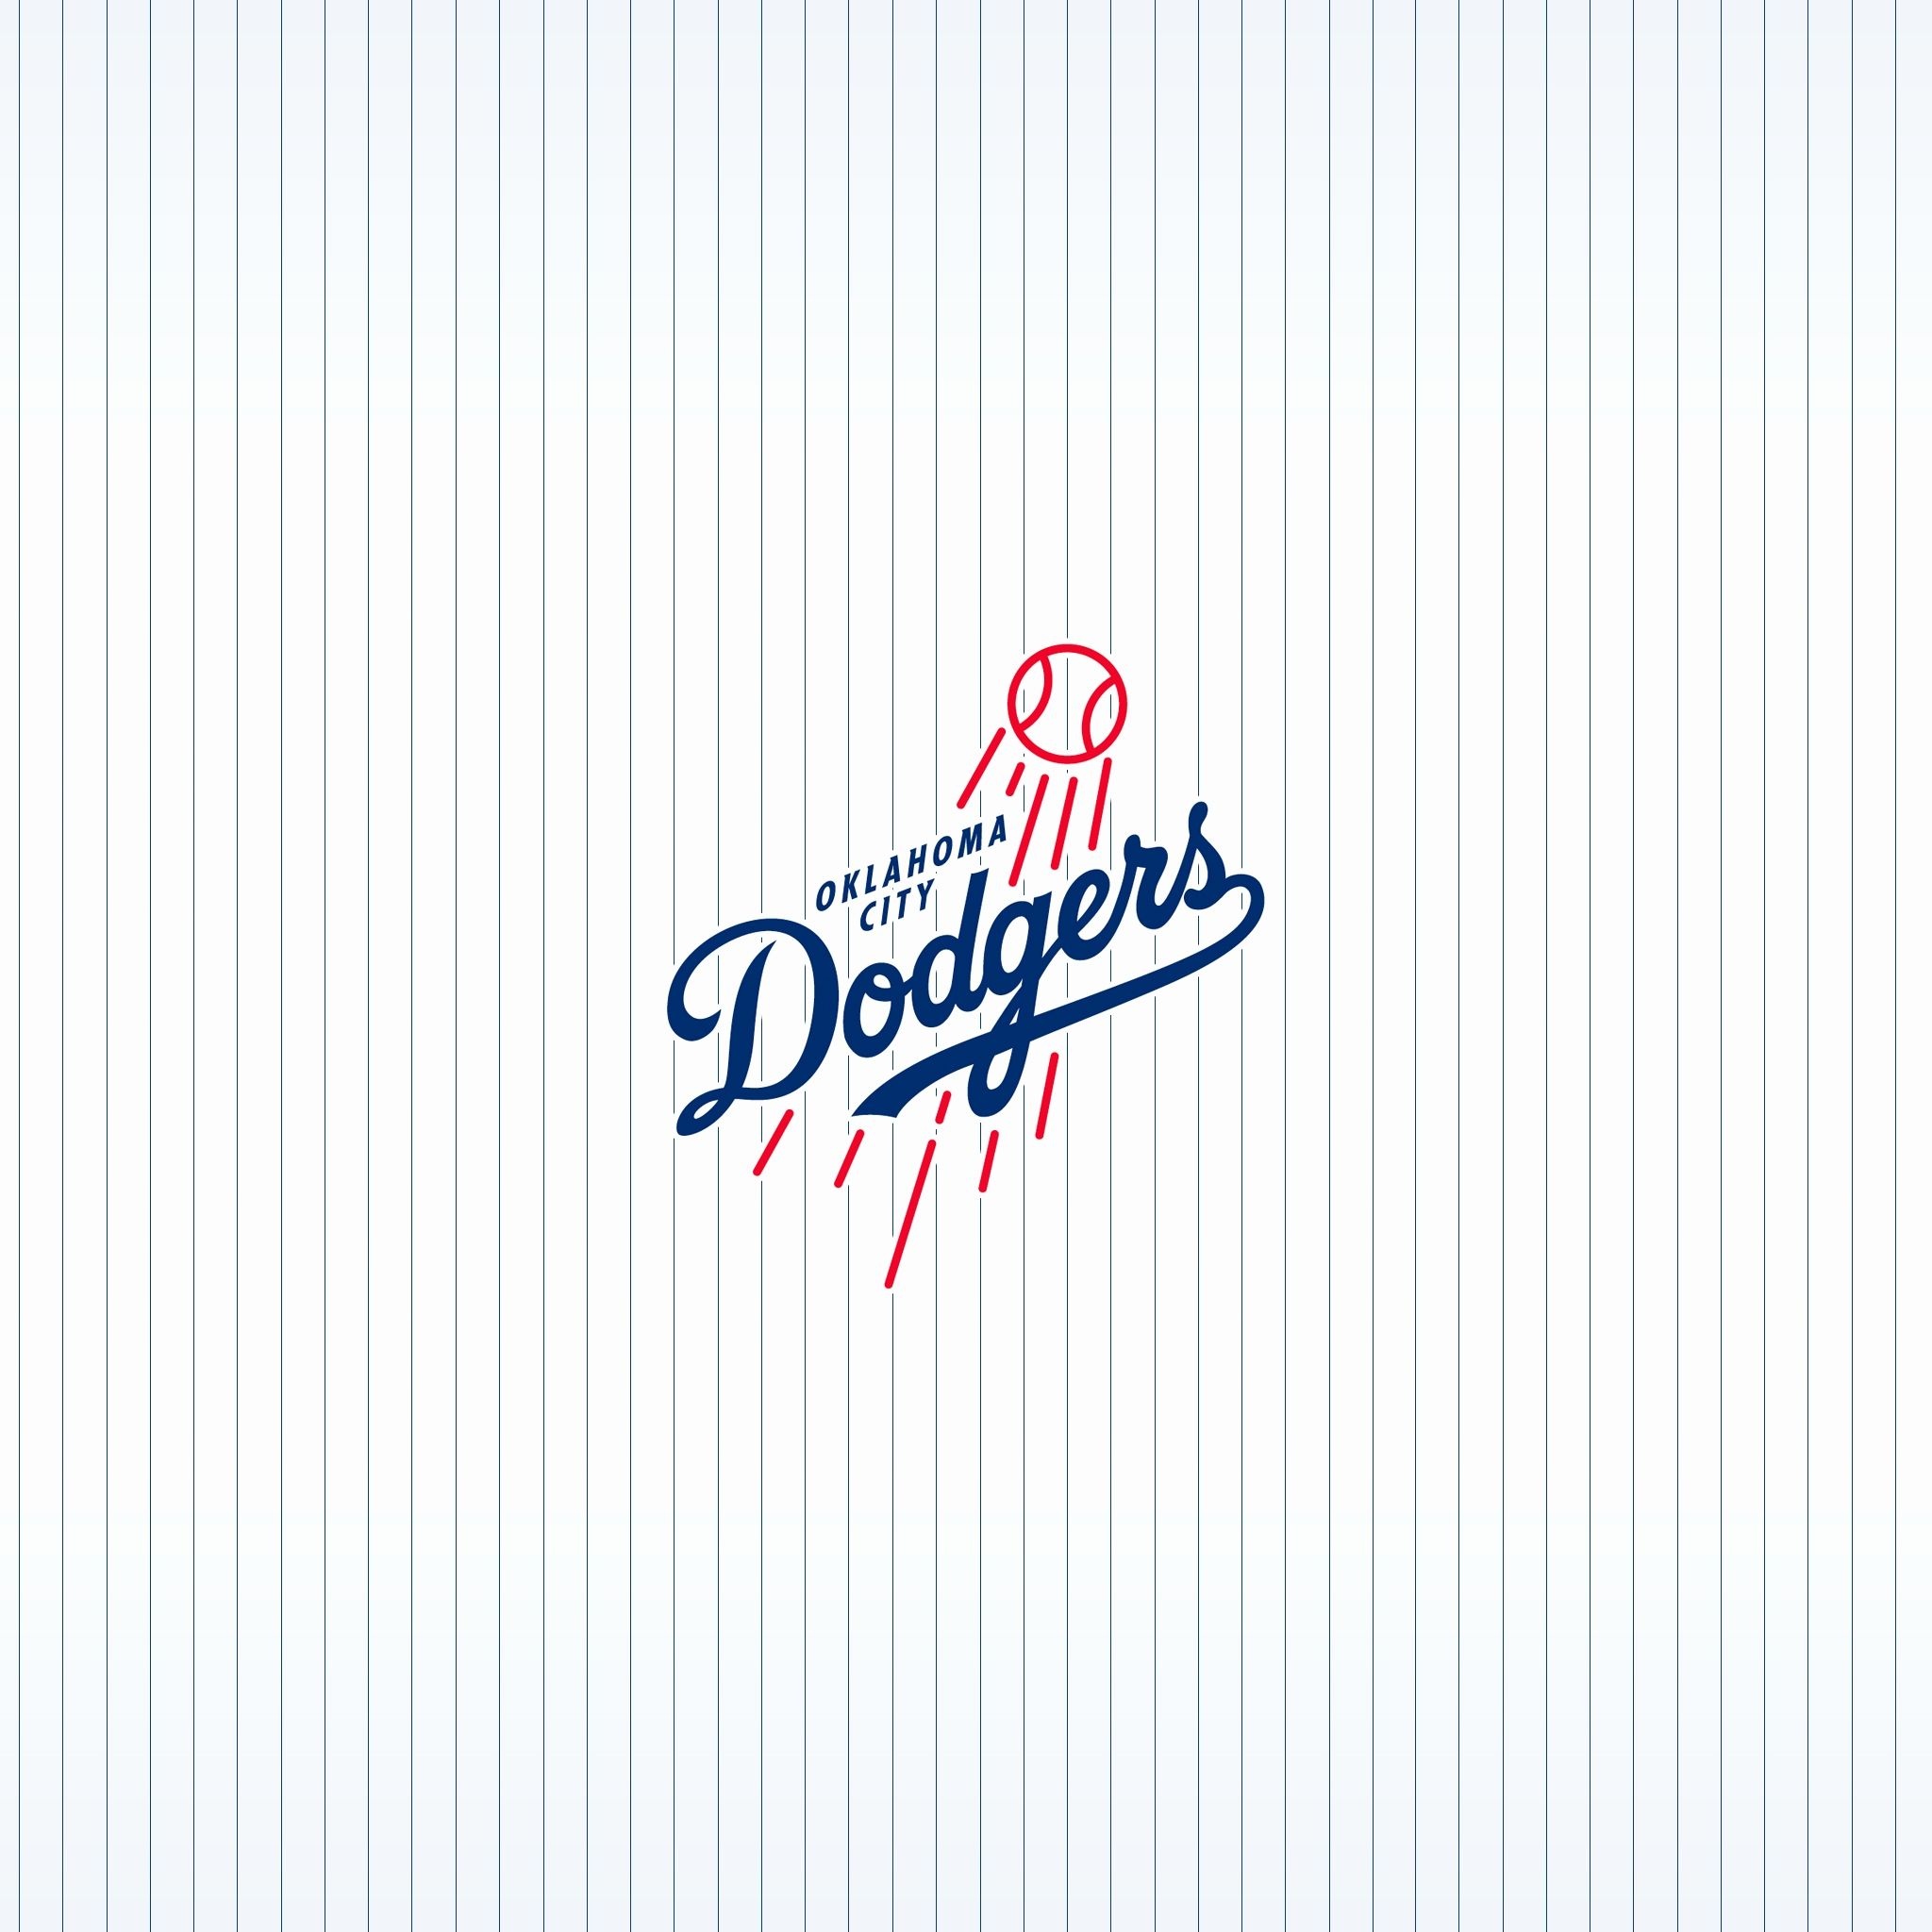 Oklahoma City Dodgers, Top free iPhone backgrounds, 2050x2050 HD Handy